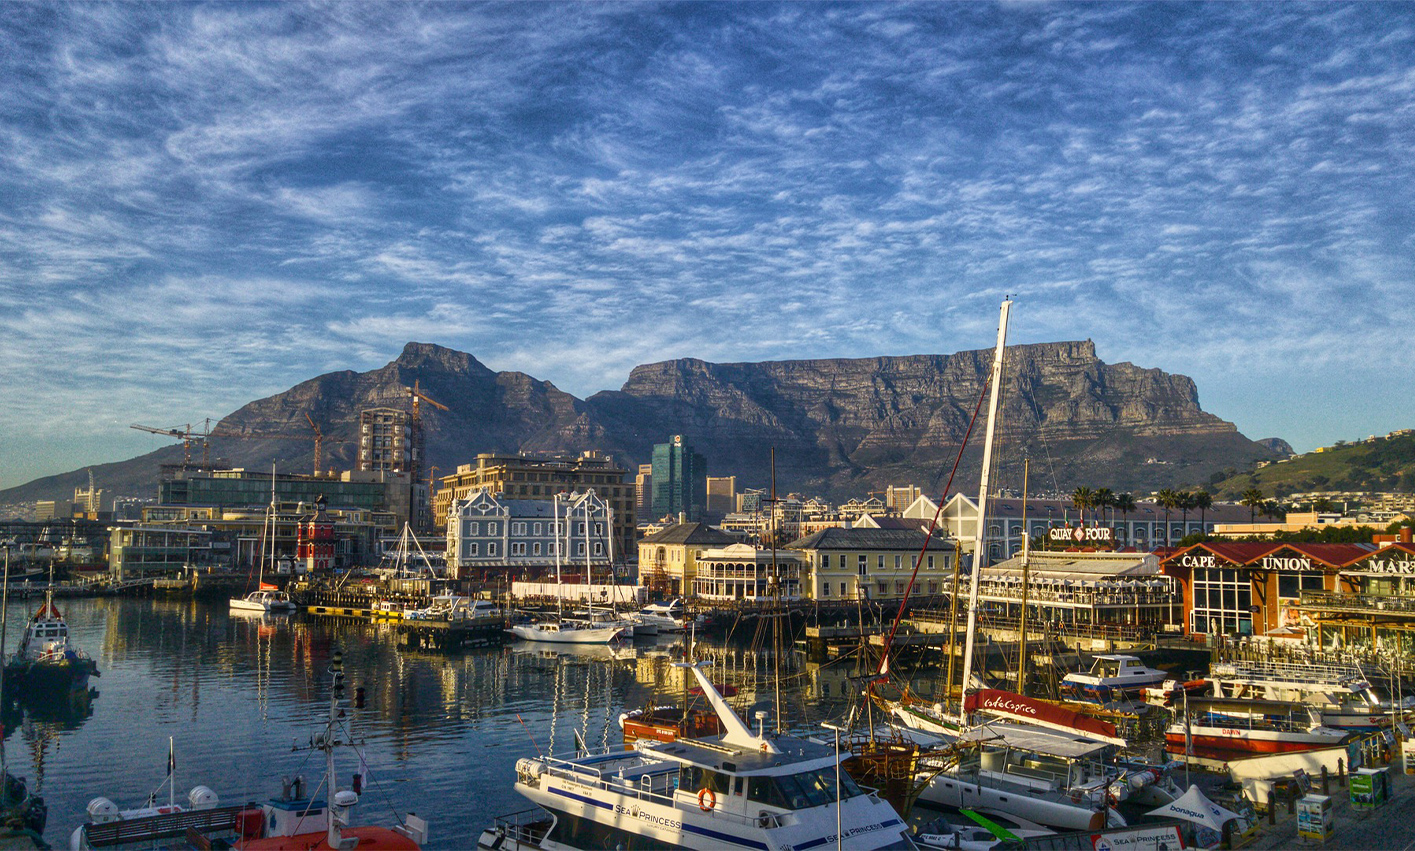 The waterfront and view of Table Mountain in Cape Town, South Africa.